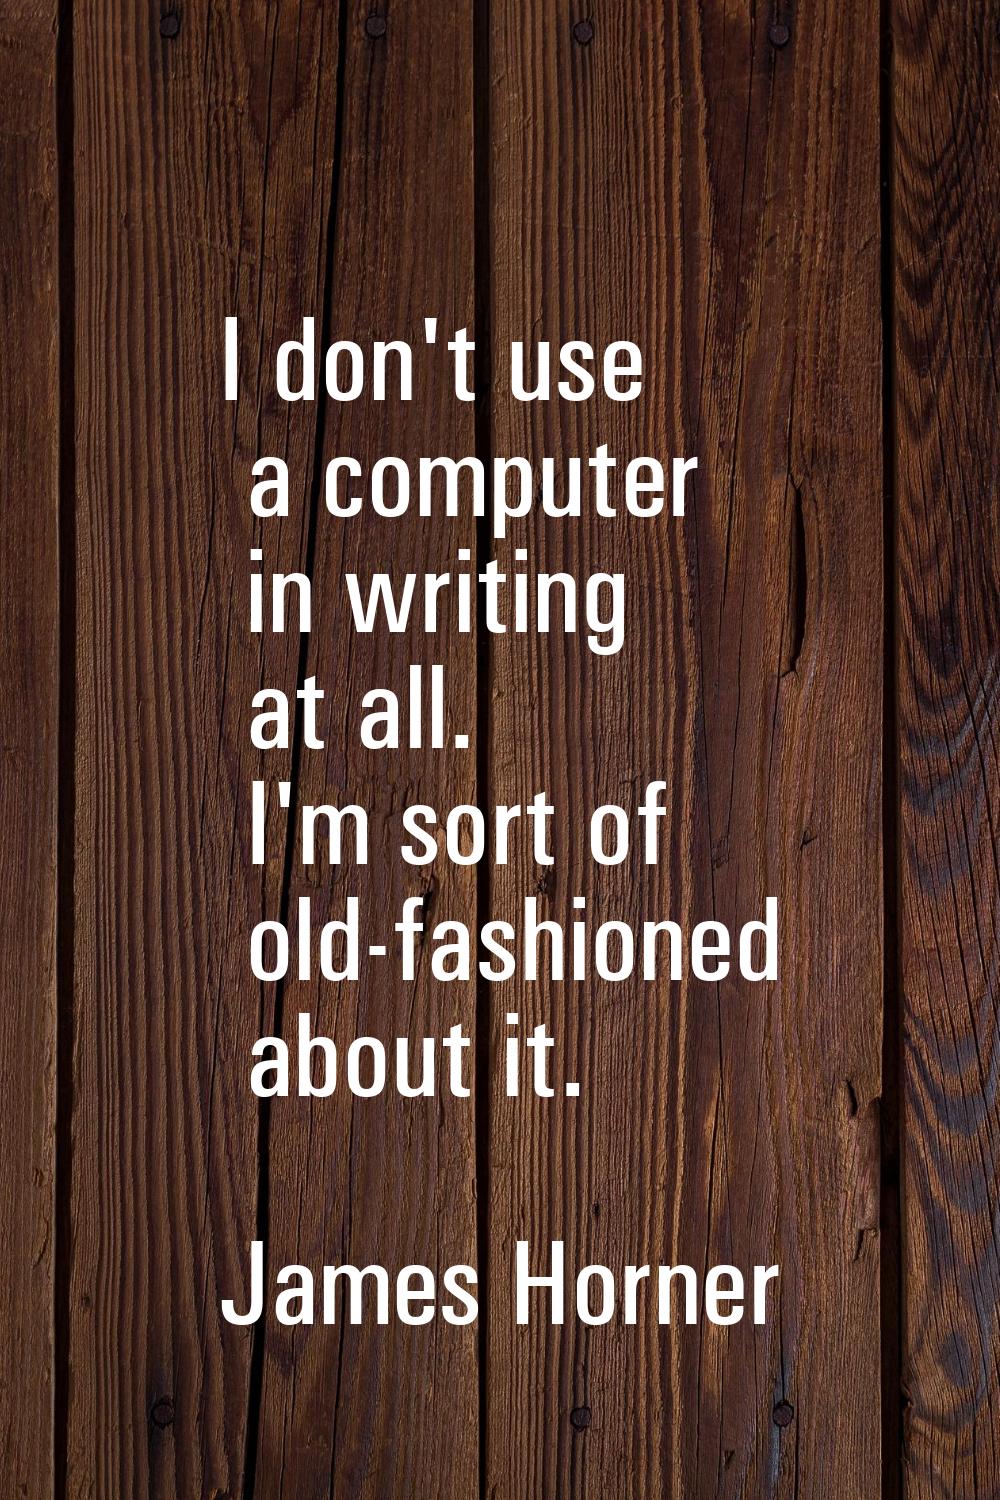 I don't use a computer in writing at all. I'm sort of old-fashioned about it.